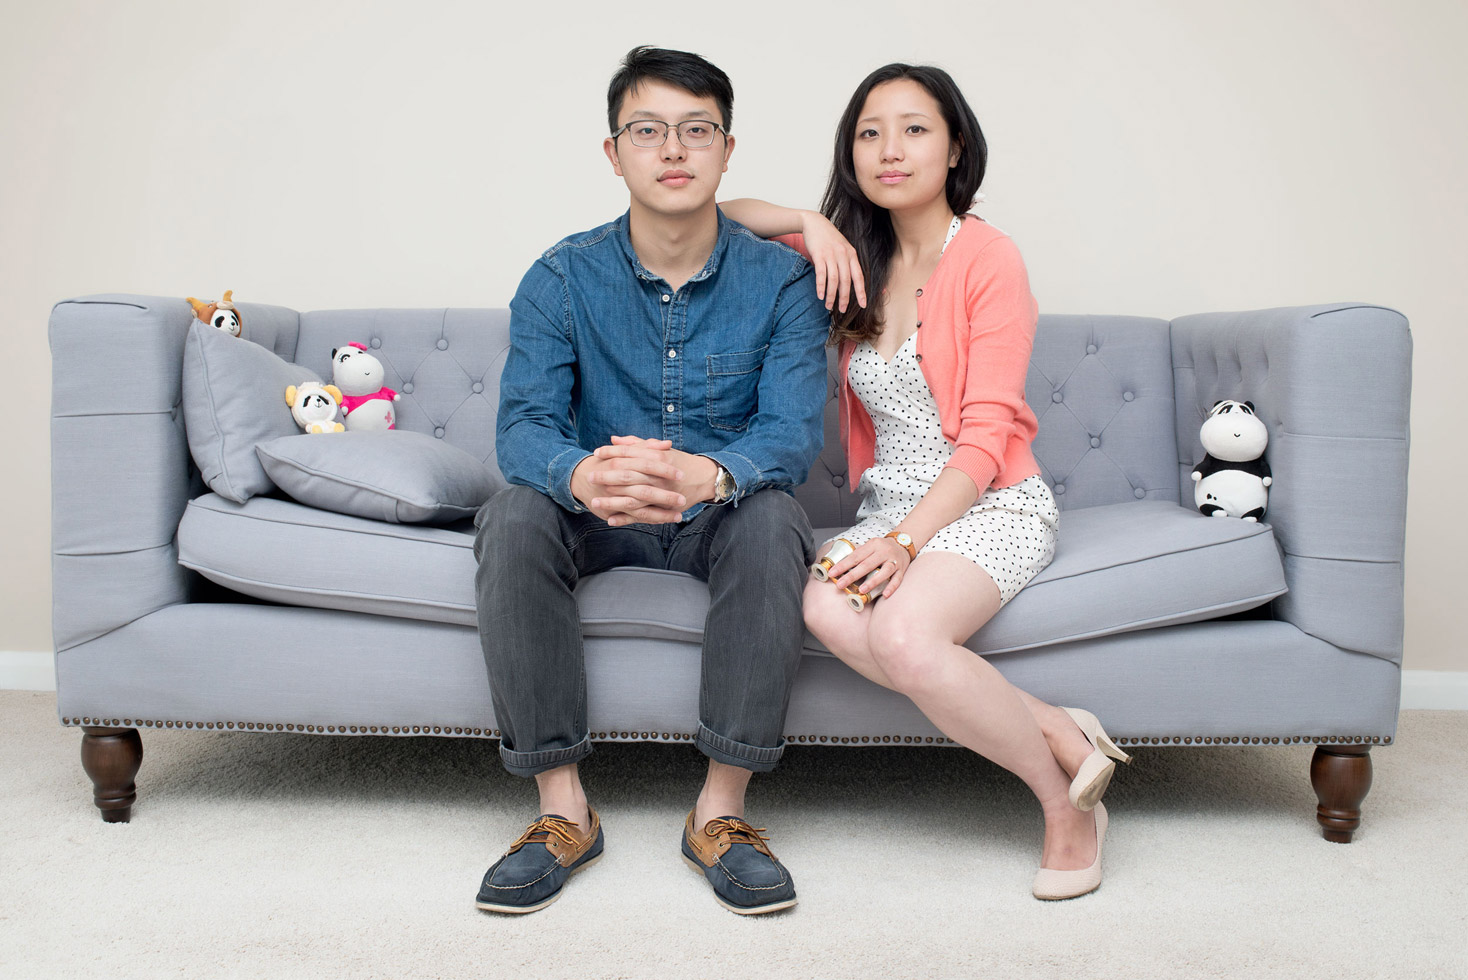 Maolin and Lin (Aberdeen, 2013)
Maolin Liao and Lin Sun. They came to Aberdeen from Langzhong, Sichuan in China to study. I photographed them in their flat, which they bought for the period of study. They are getting married soon and are planning to return to China after finishing their PhDs.
Foreign students are important to the Scottish economy: in Aberdeen alone the amount of money spent by international students every year is around £67 million.